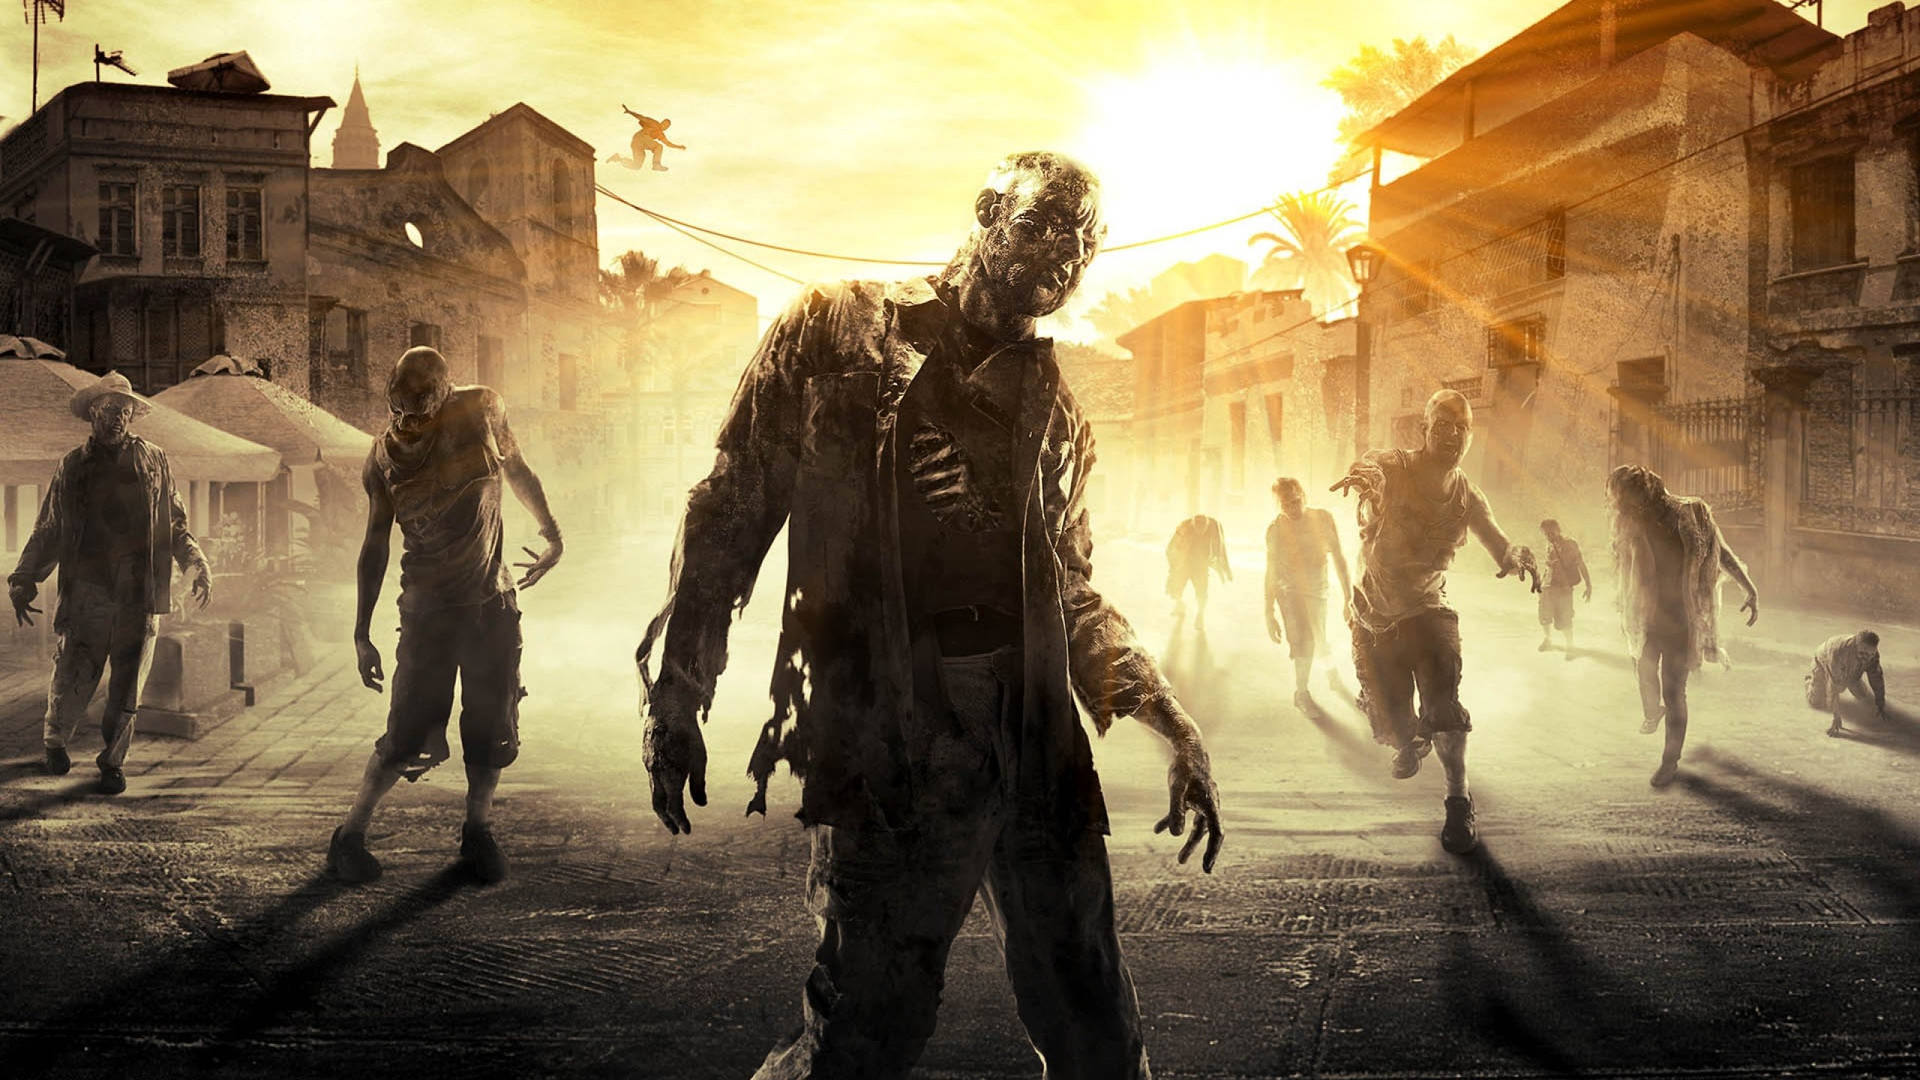 “Will you survive in the Zombie Apocalypse?” Wallpaper